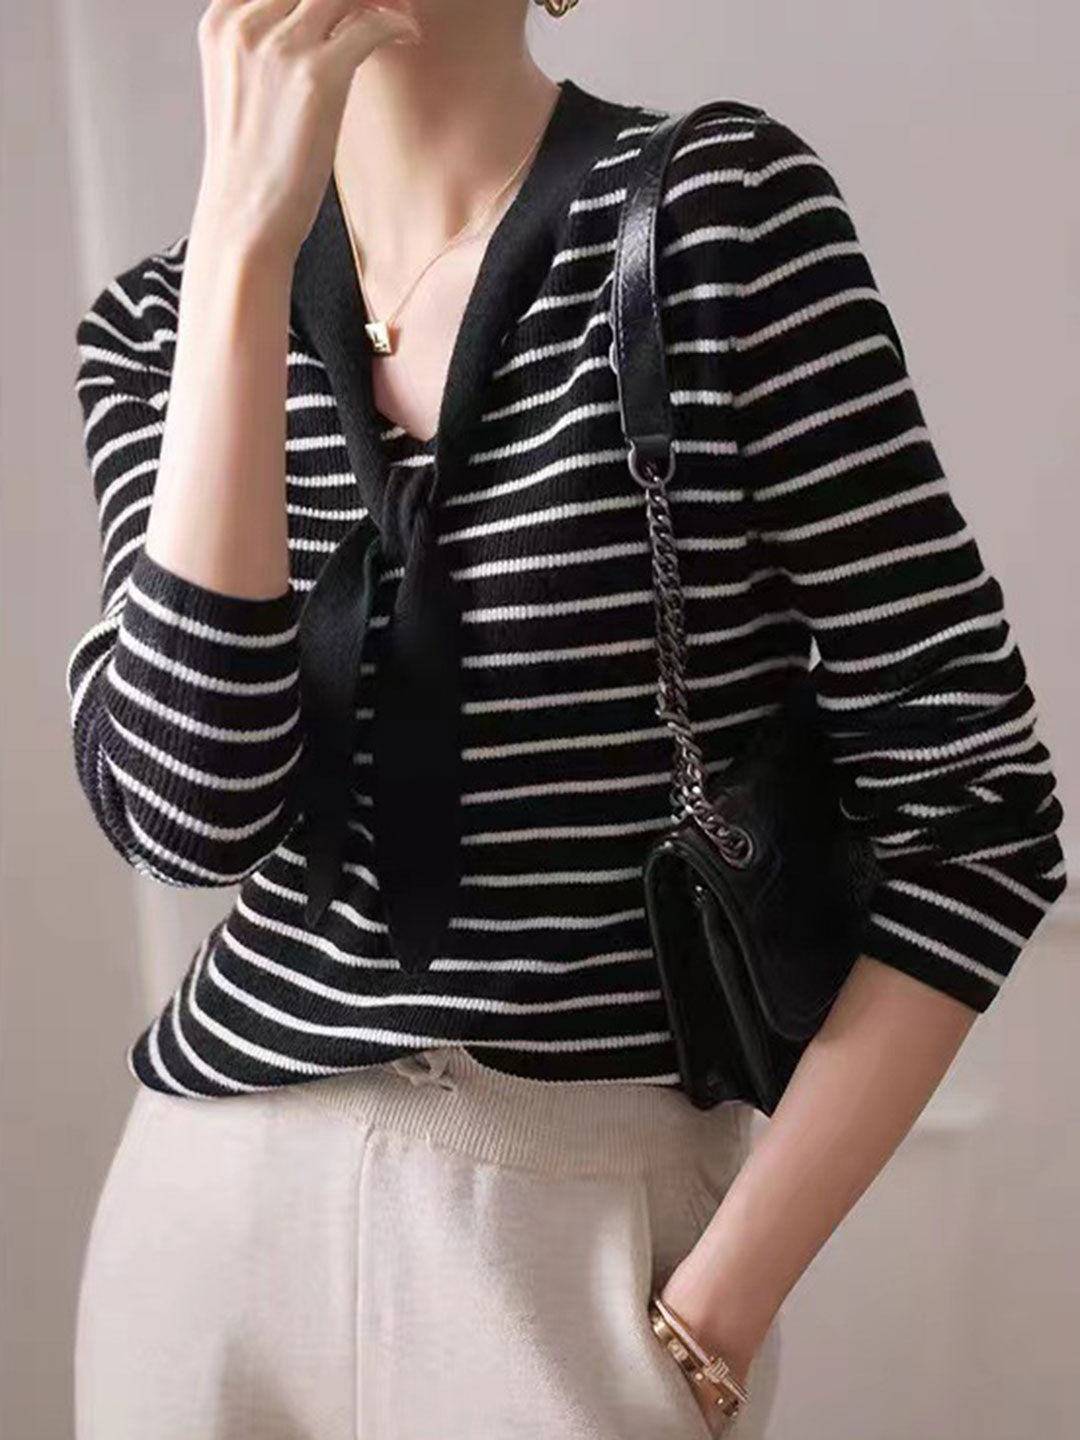 Chloe Vintage Bow Striped Knitted Top Sweater